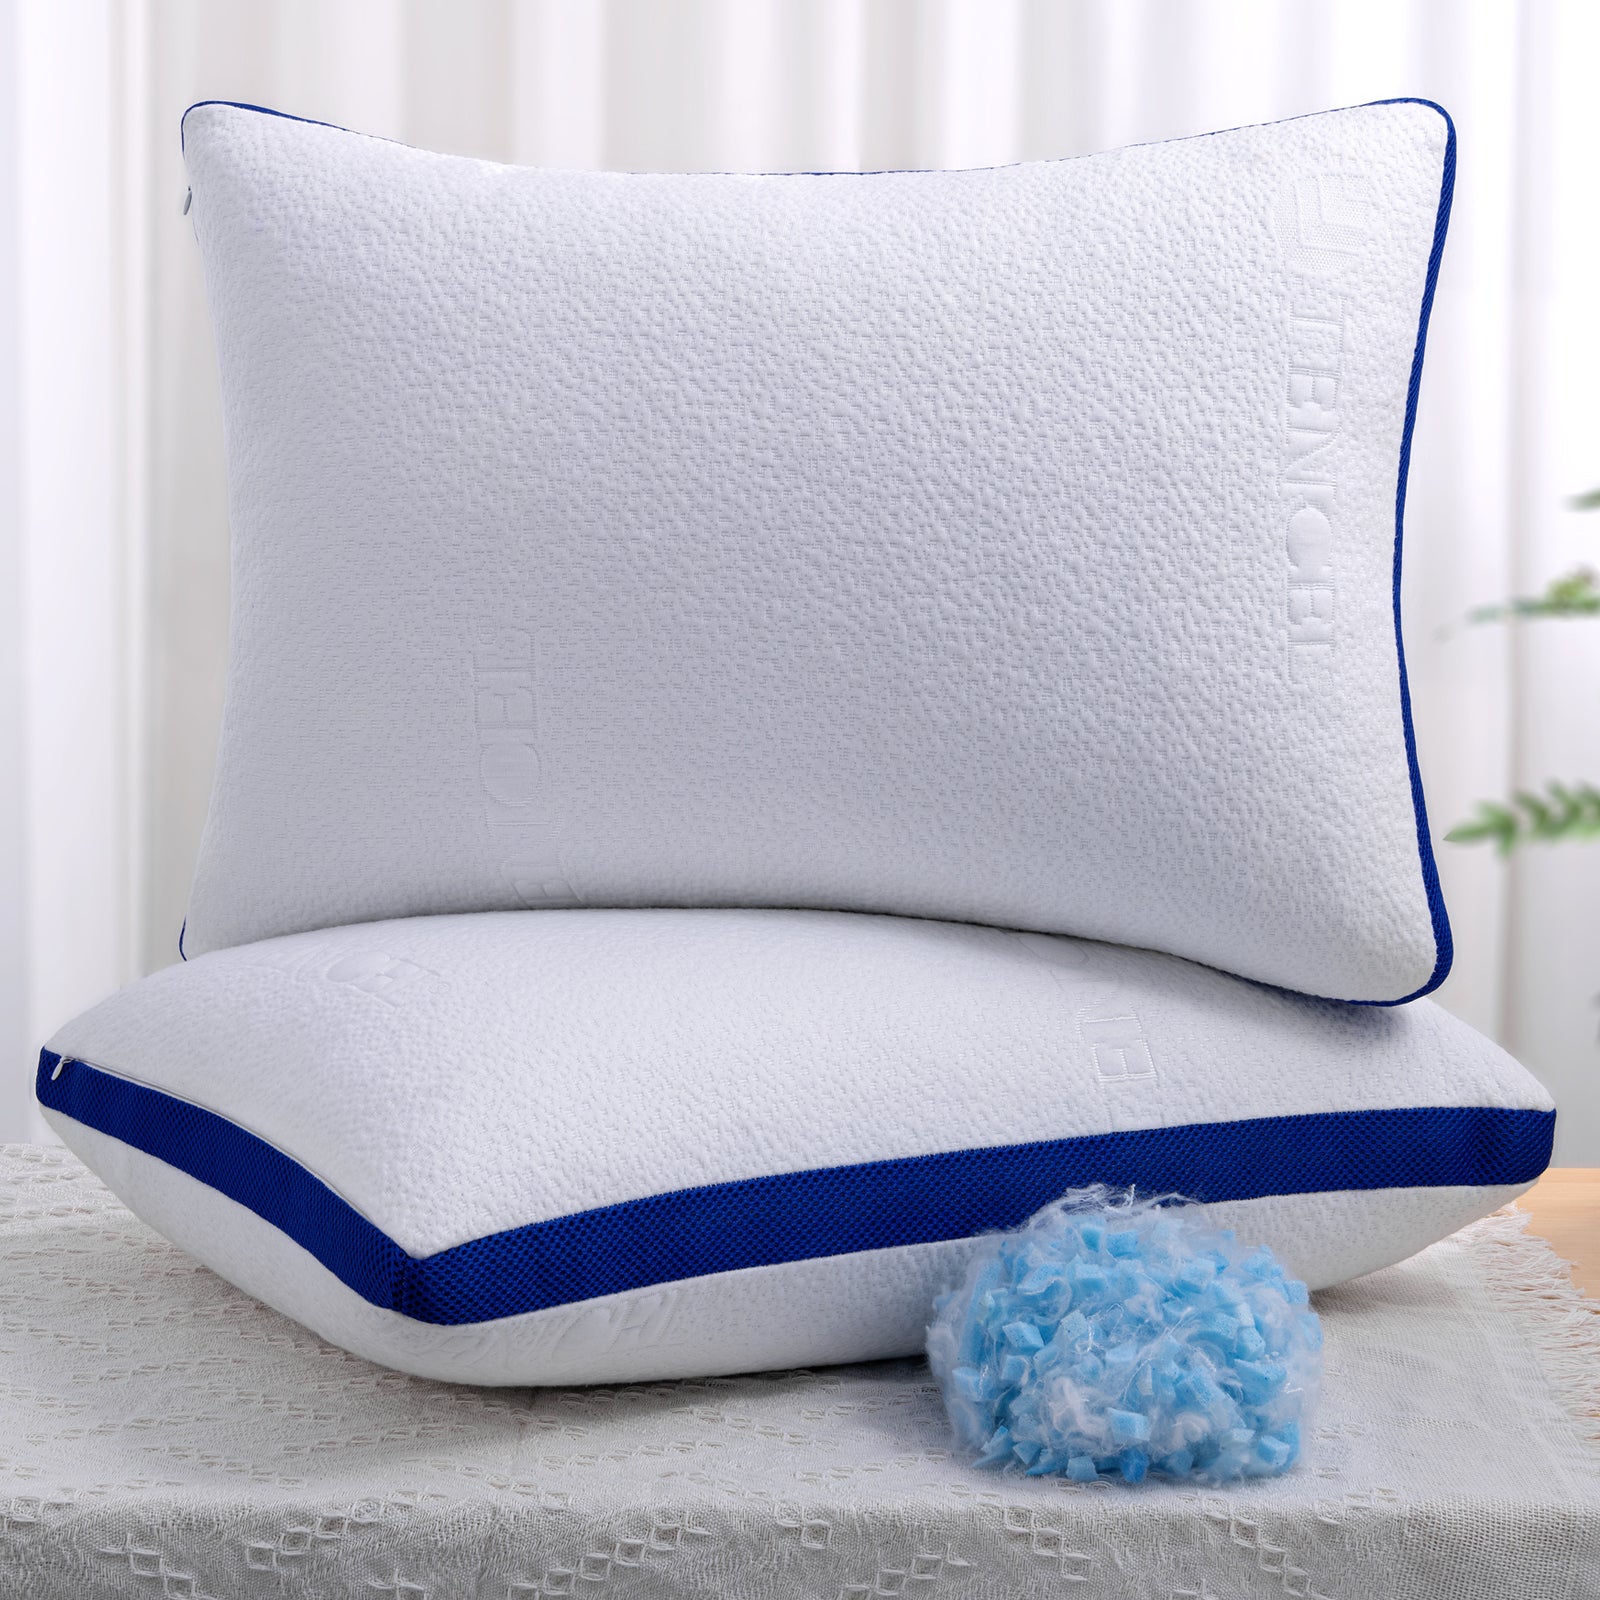 Pin on Orthopedic And Cooling Pillows